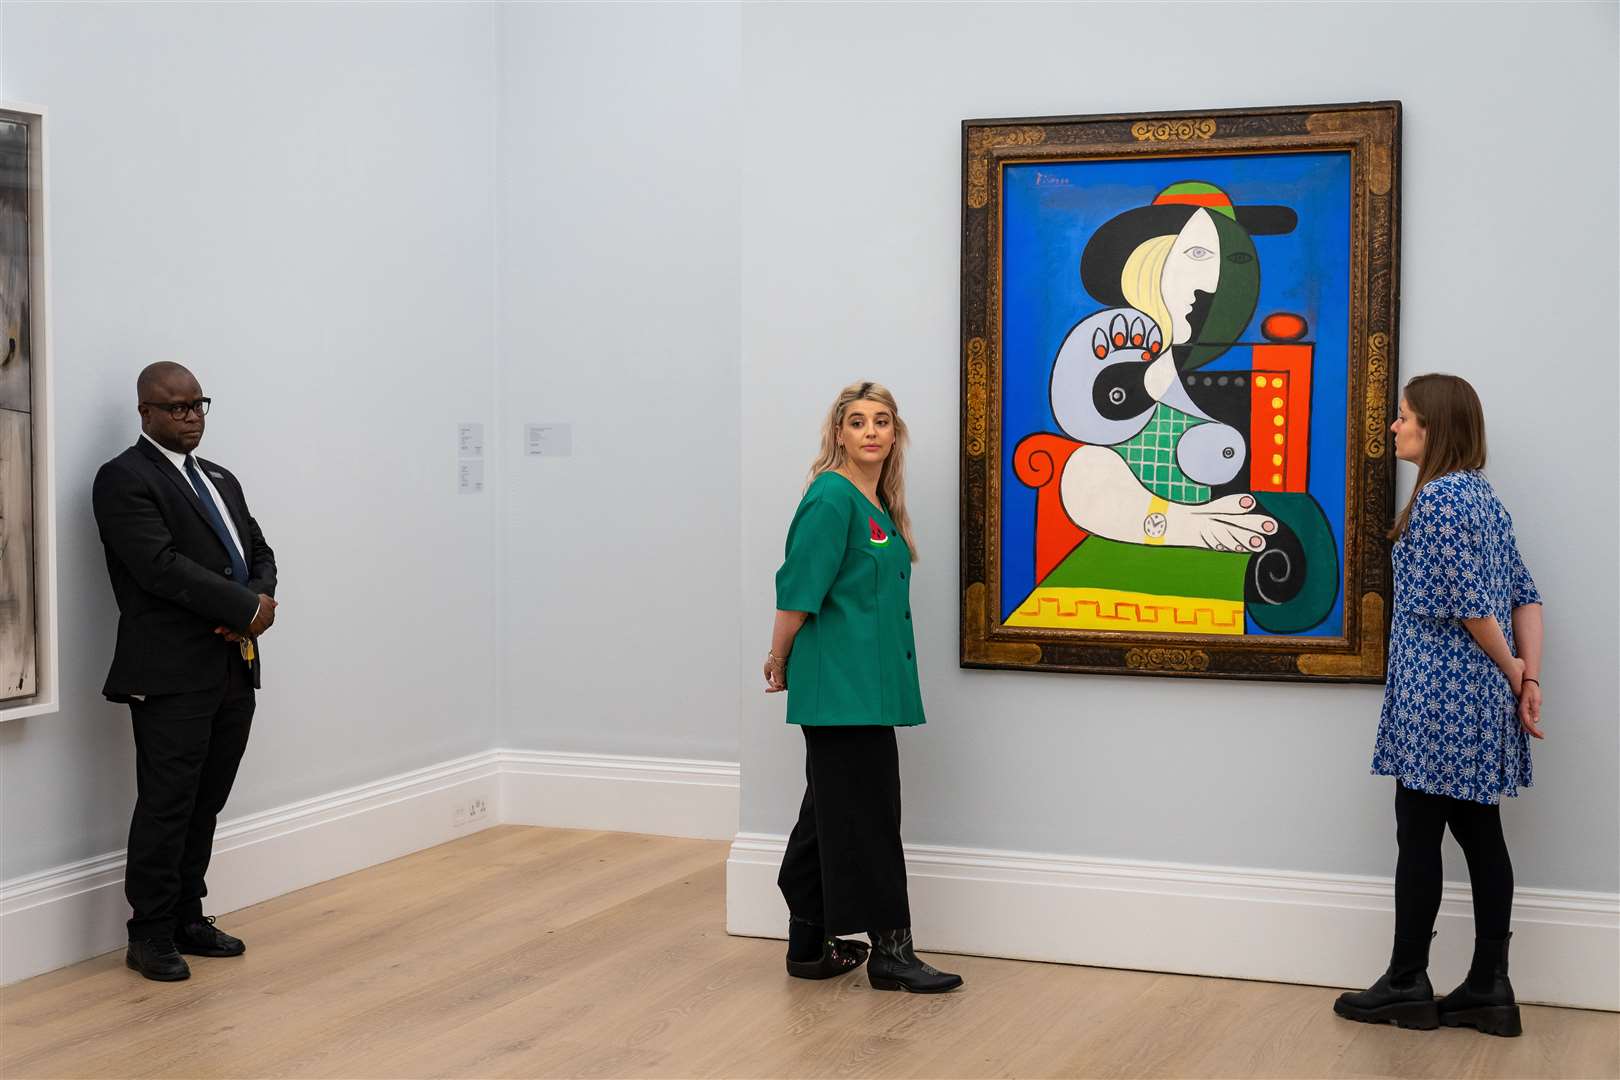 The piece is estimated to fetch in excess of 120 million US dollars (Aaron Chown/PA)